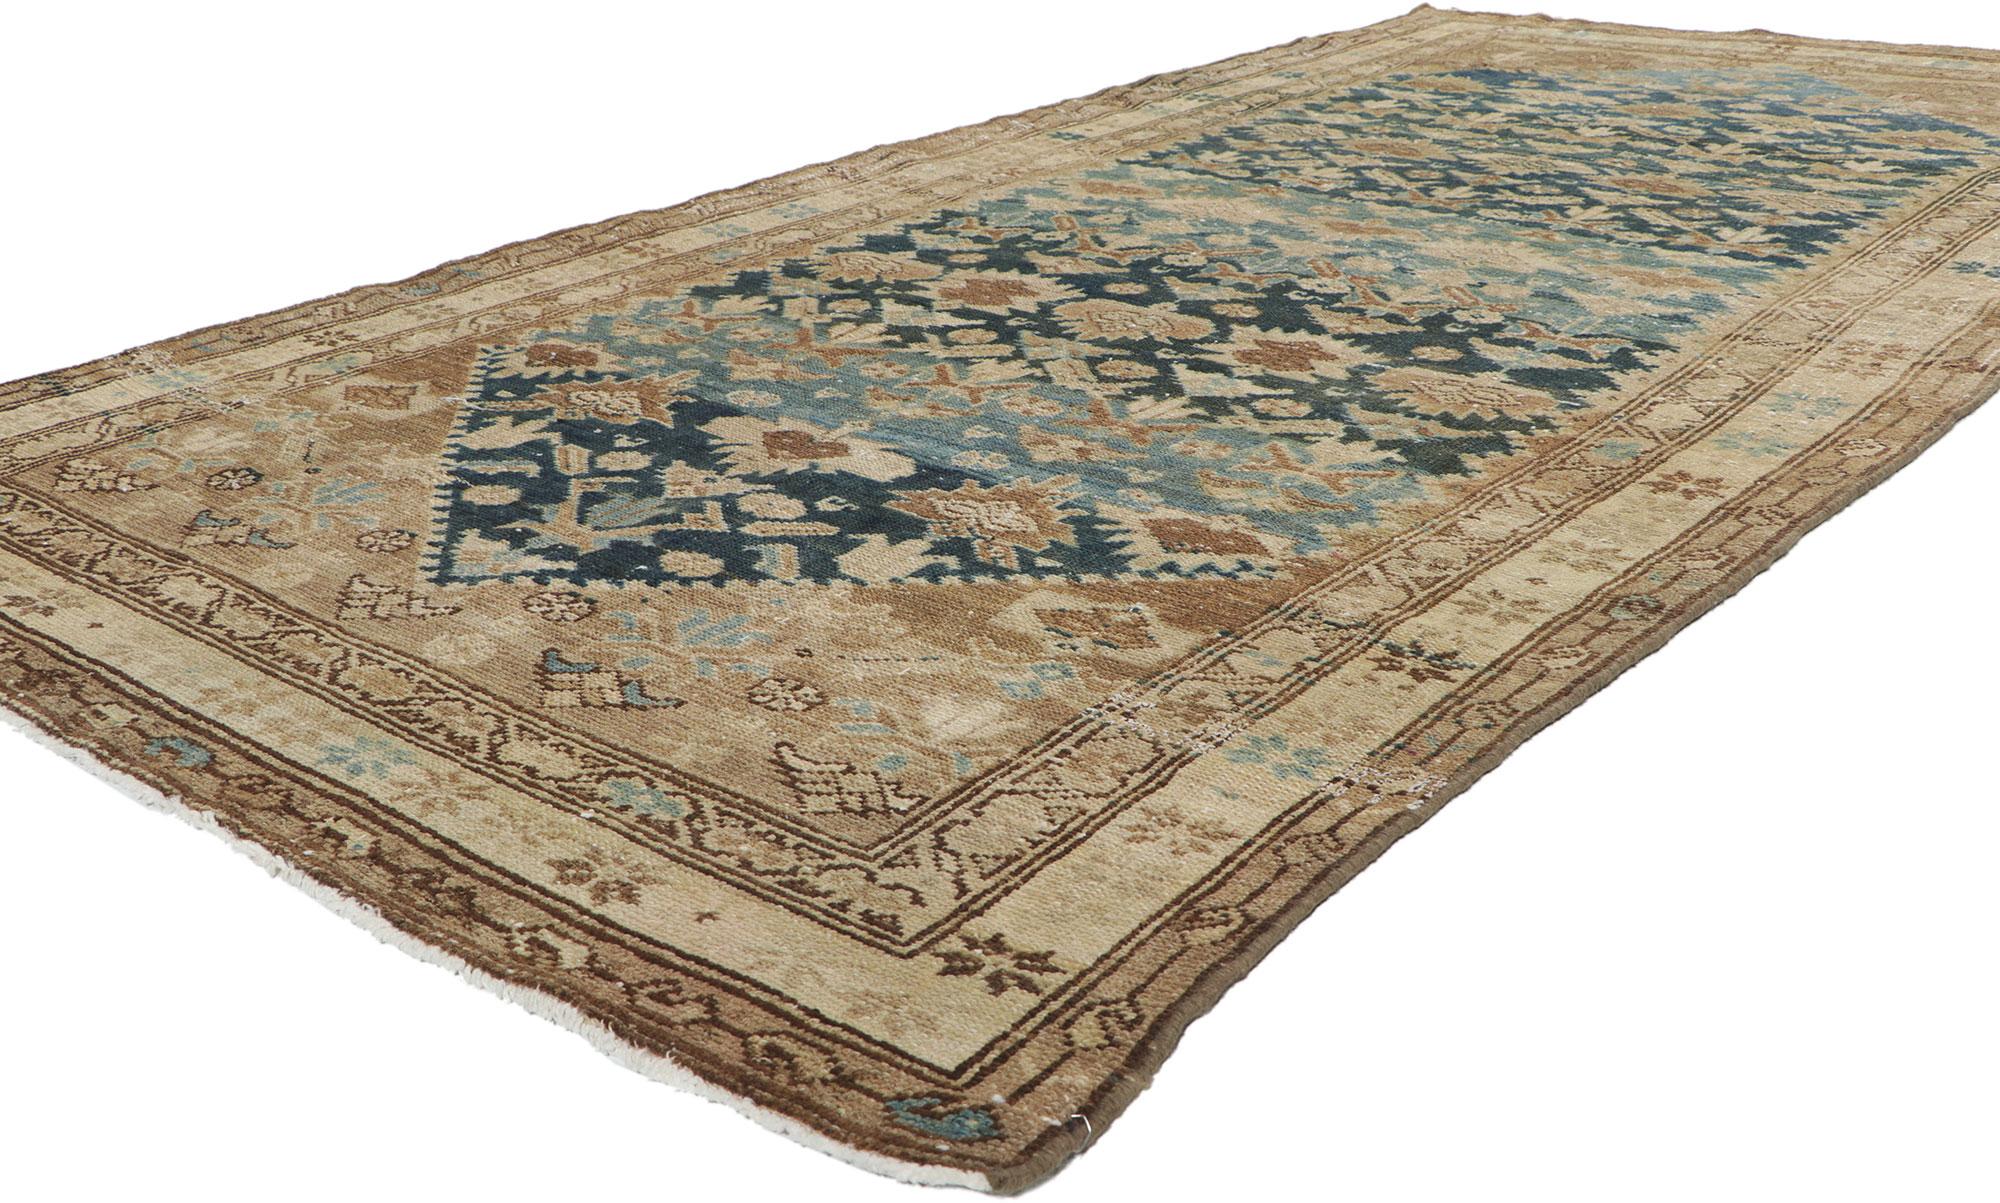 60955 antique Persian Malayer Gallery rug, 04'08 x 09'08. With its lovingly time-worn composition and effortless beauty, this hand-knotted wool distressed vintage Persian Malayer gallery rug is a captivating vision of woven beauty. The abrashed